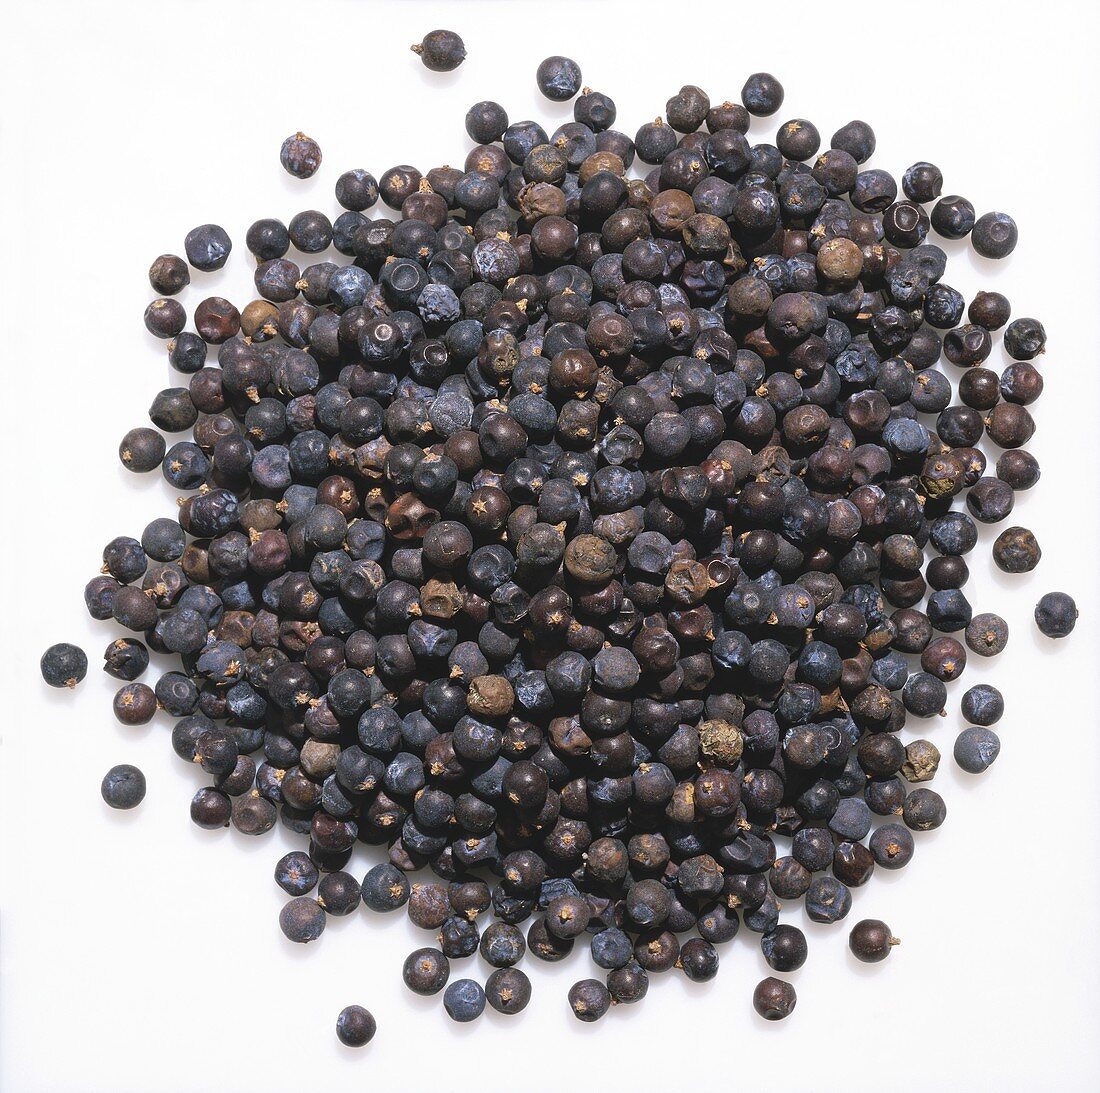 Pile of Juniper Berries on a White Background